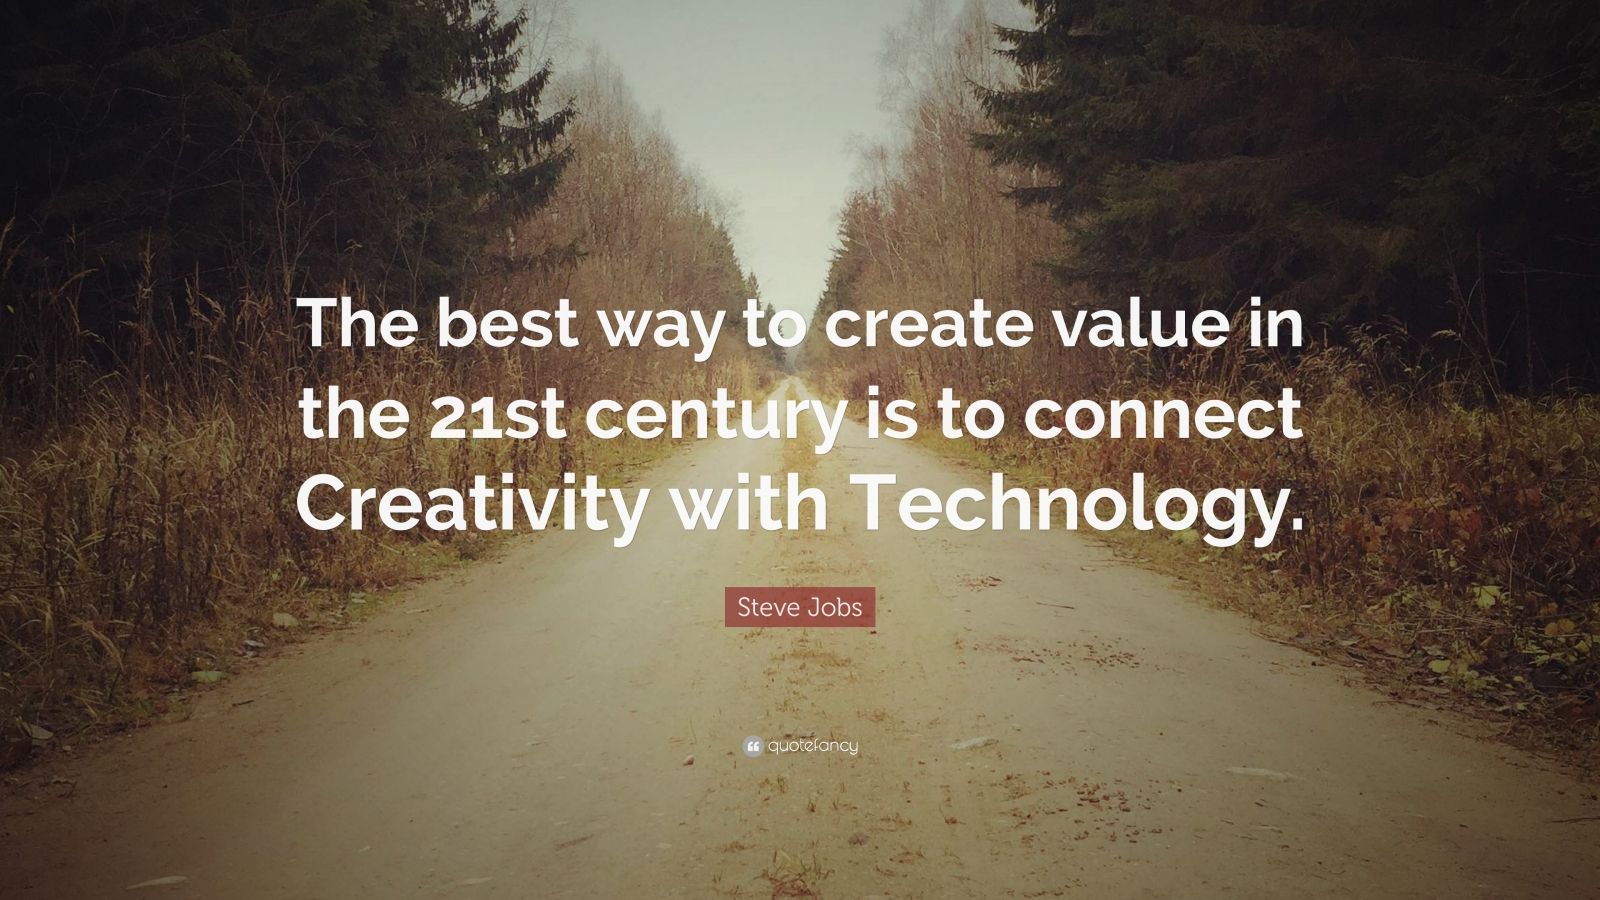 Steve Jobs Quote: “The best way to create value in the 21st century is ...